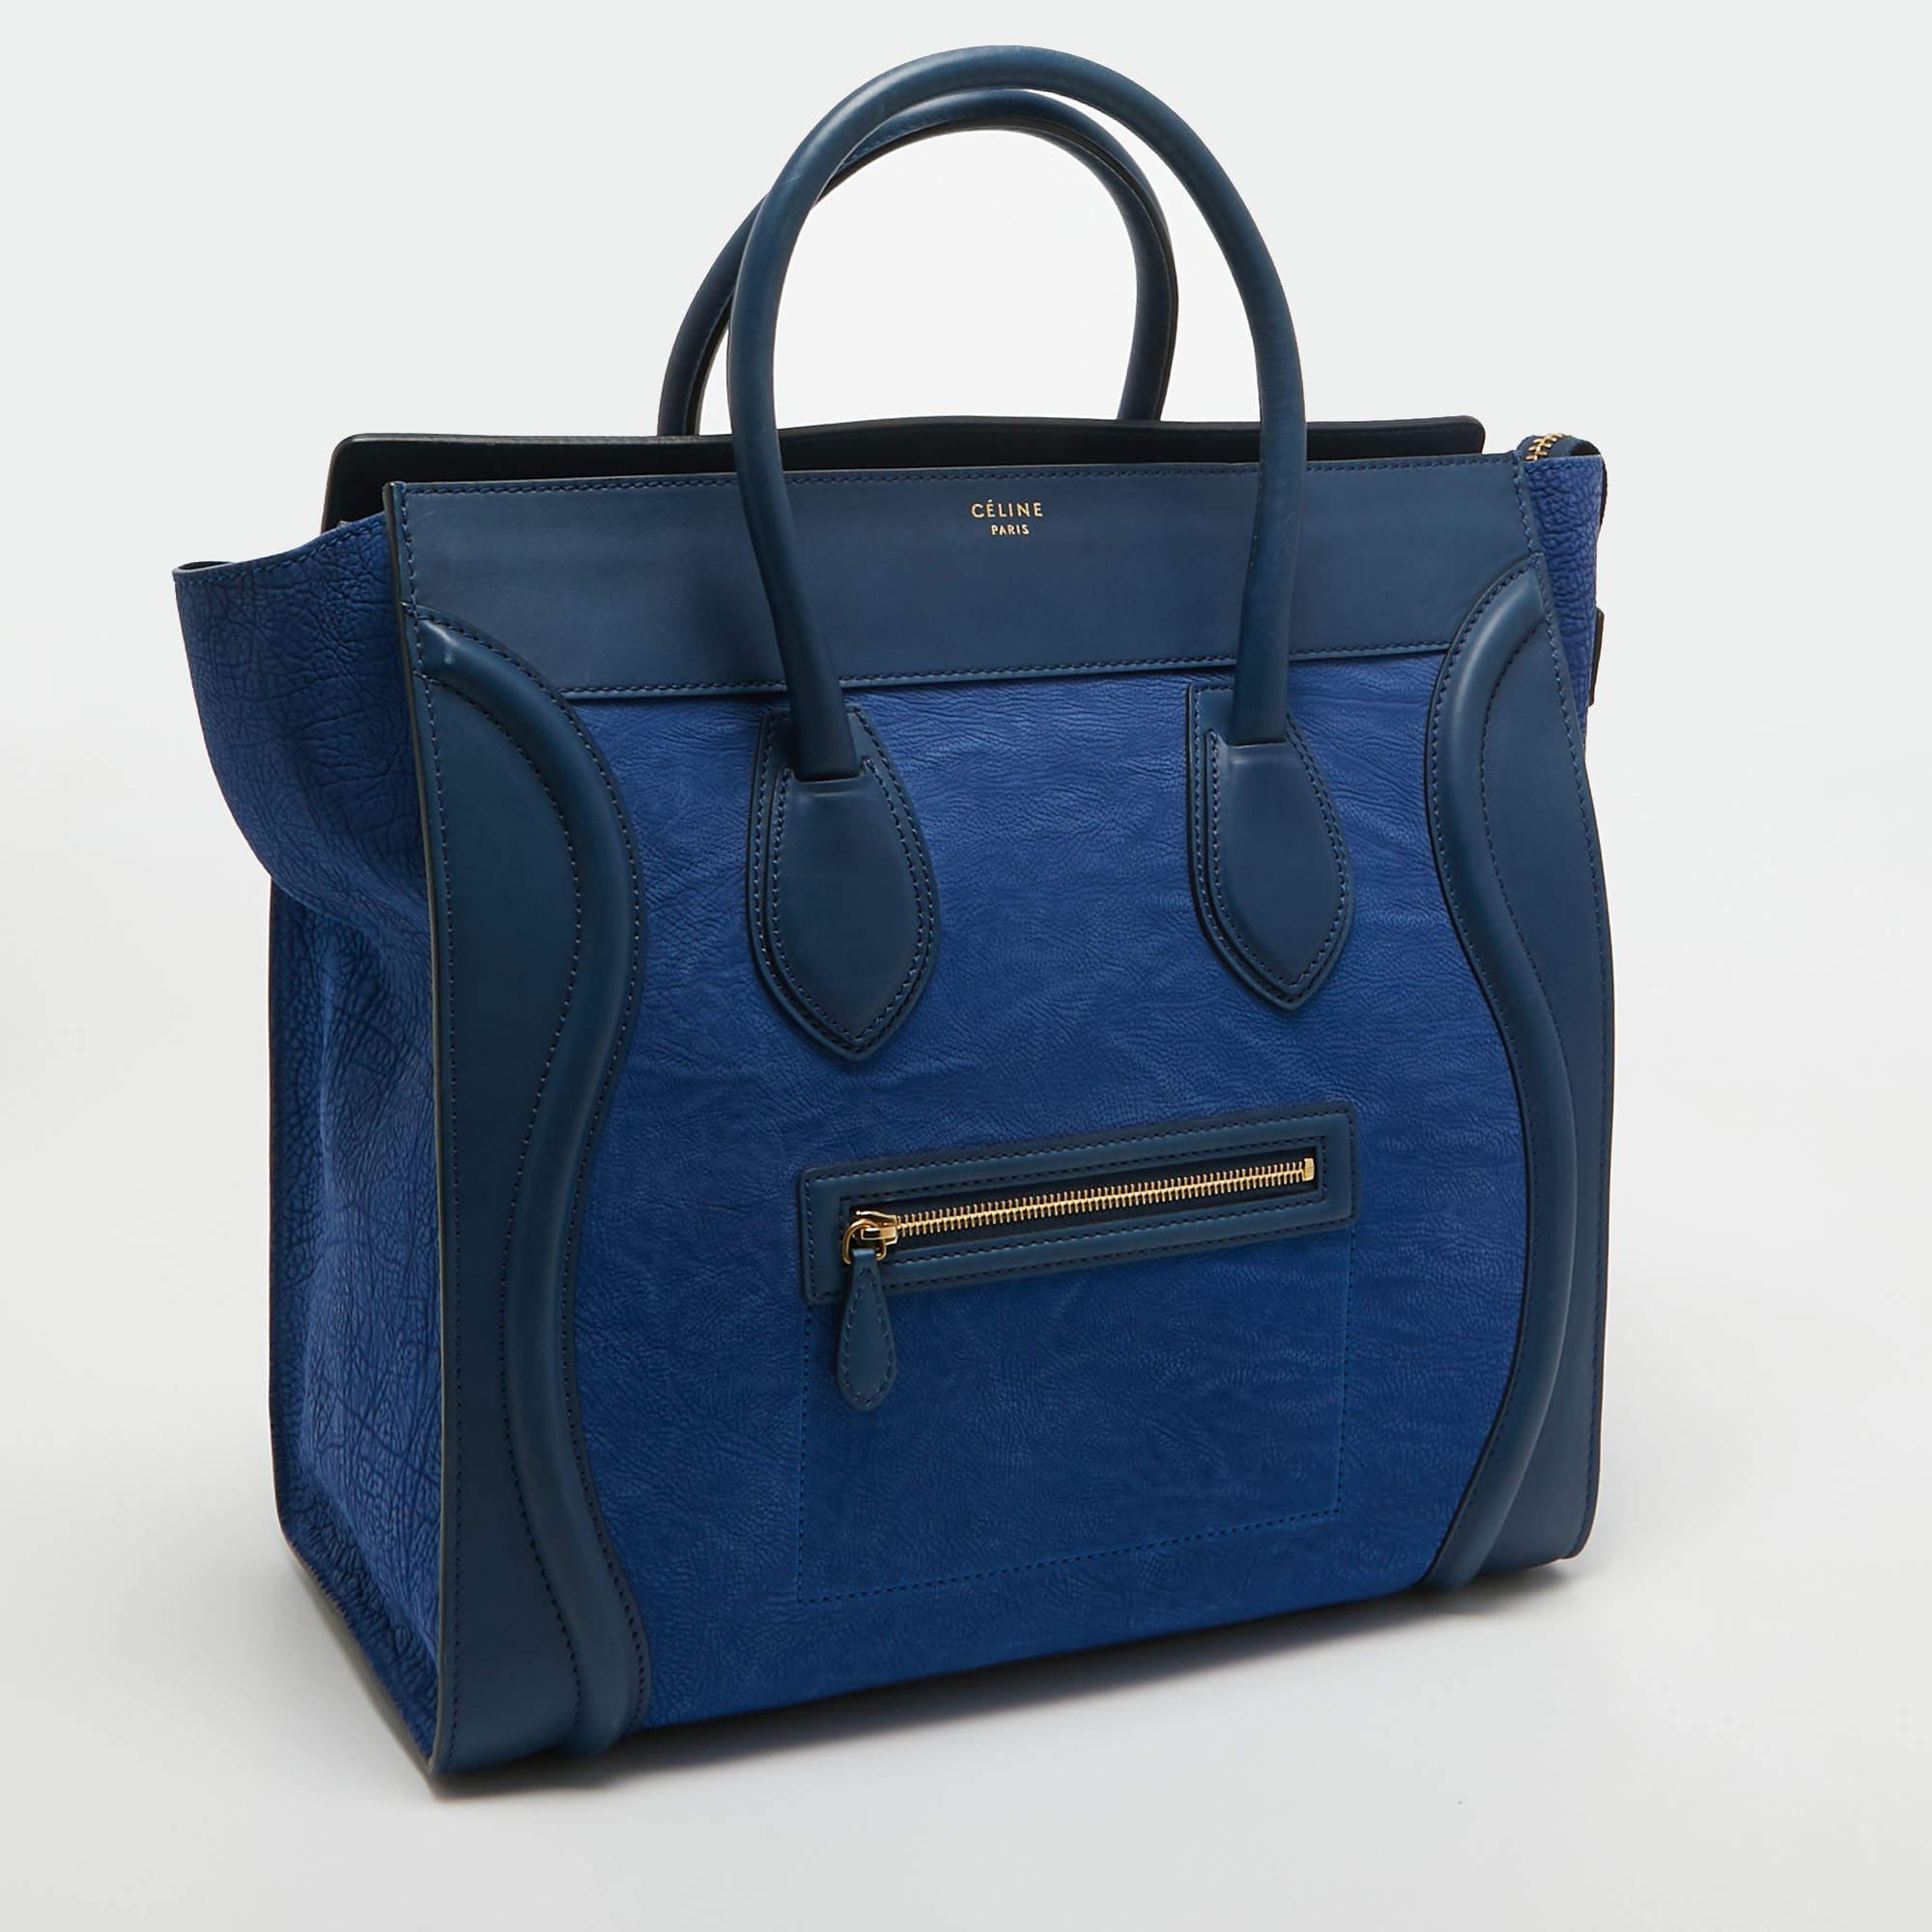 The usage of two-tone blue leather on the exterior gives this Celine tote a high appeal. An eye-catching accessory, the bag features a front zipper pocket, dual handles at the top, and gold-tone hardware. The leather-lined interior is equipped to